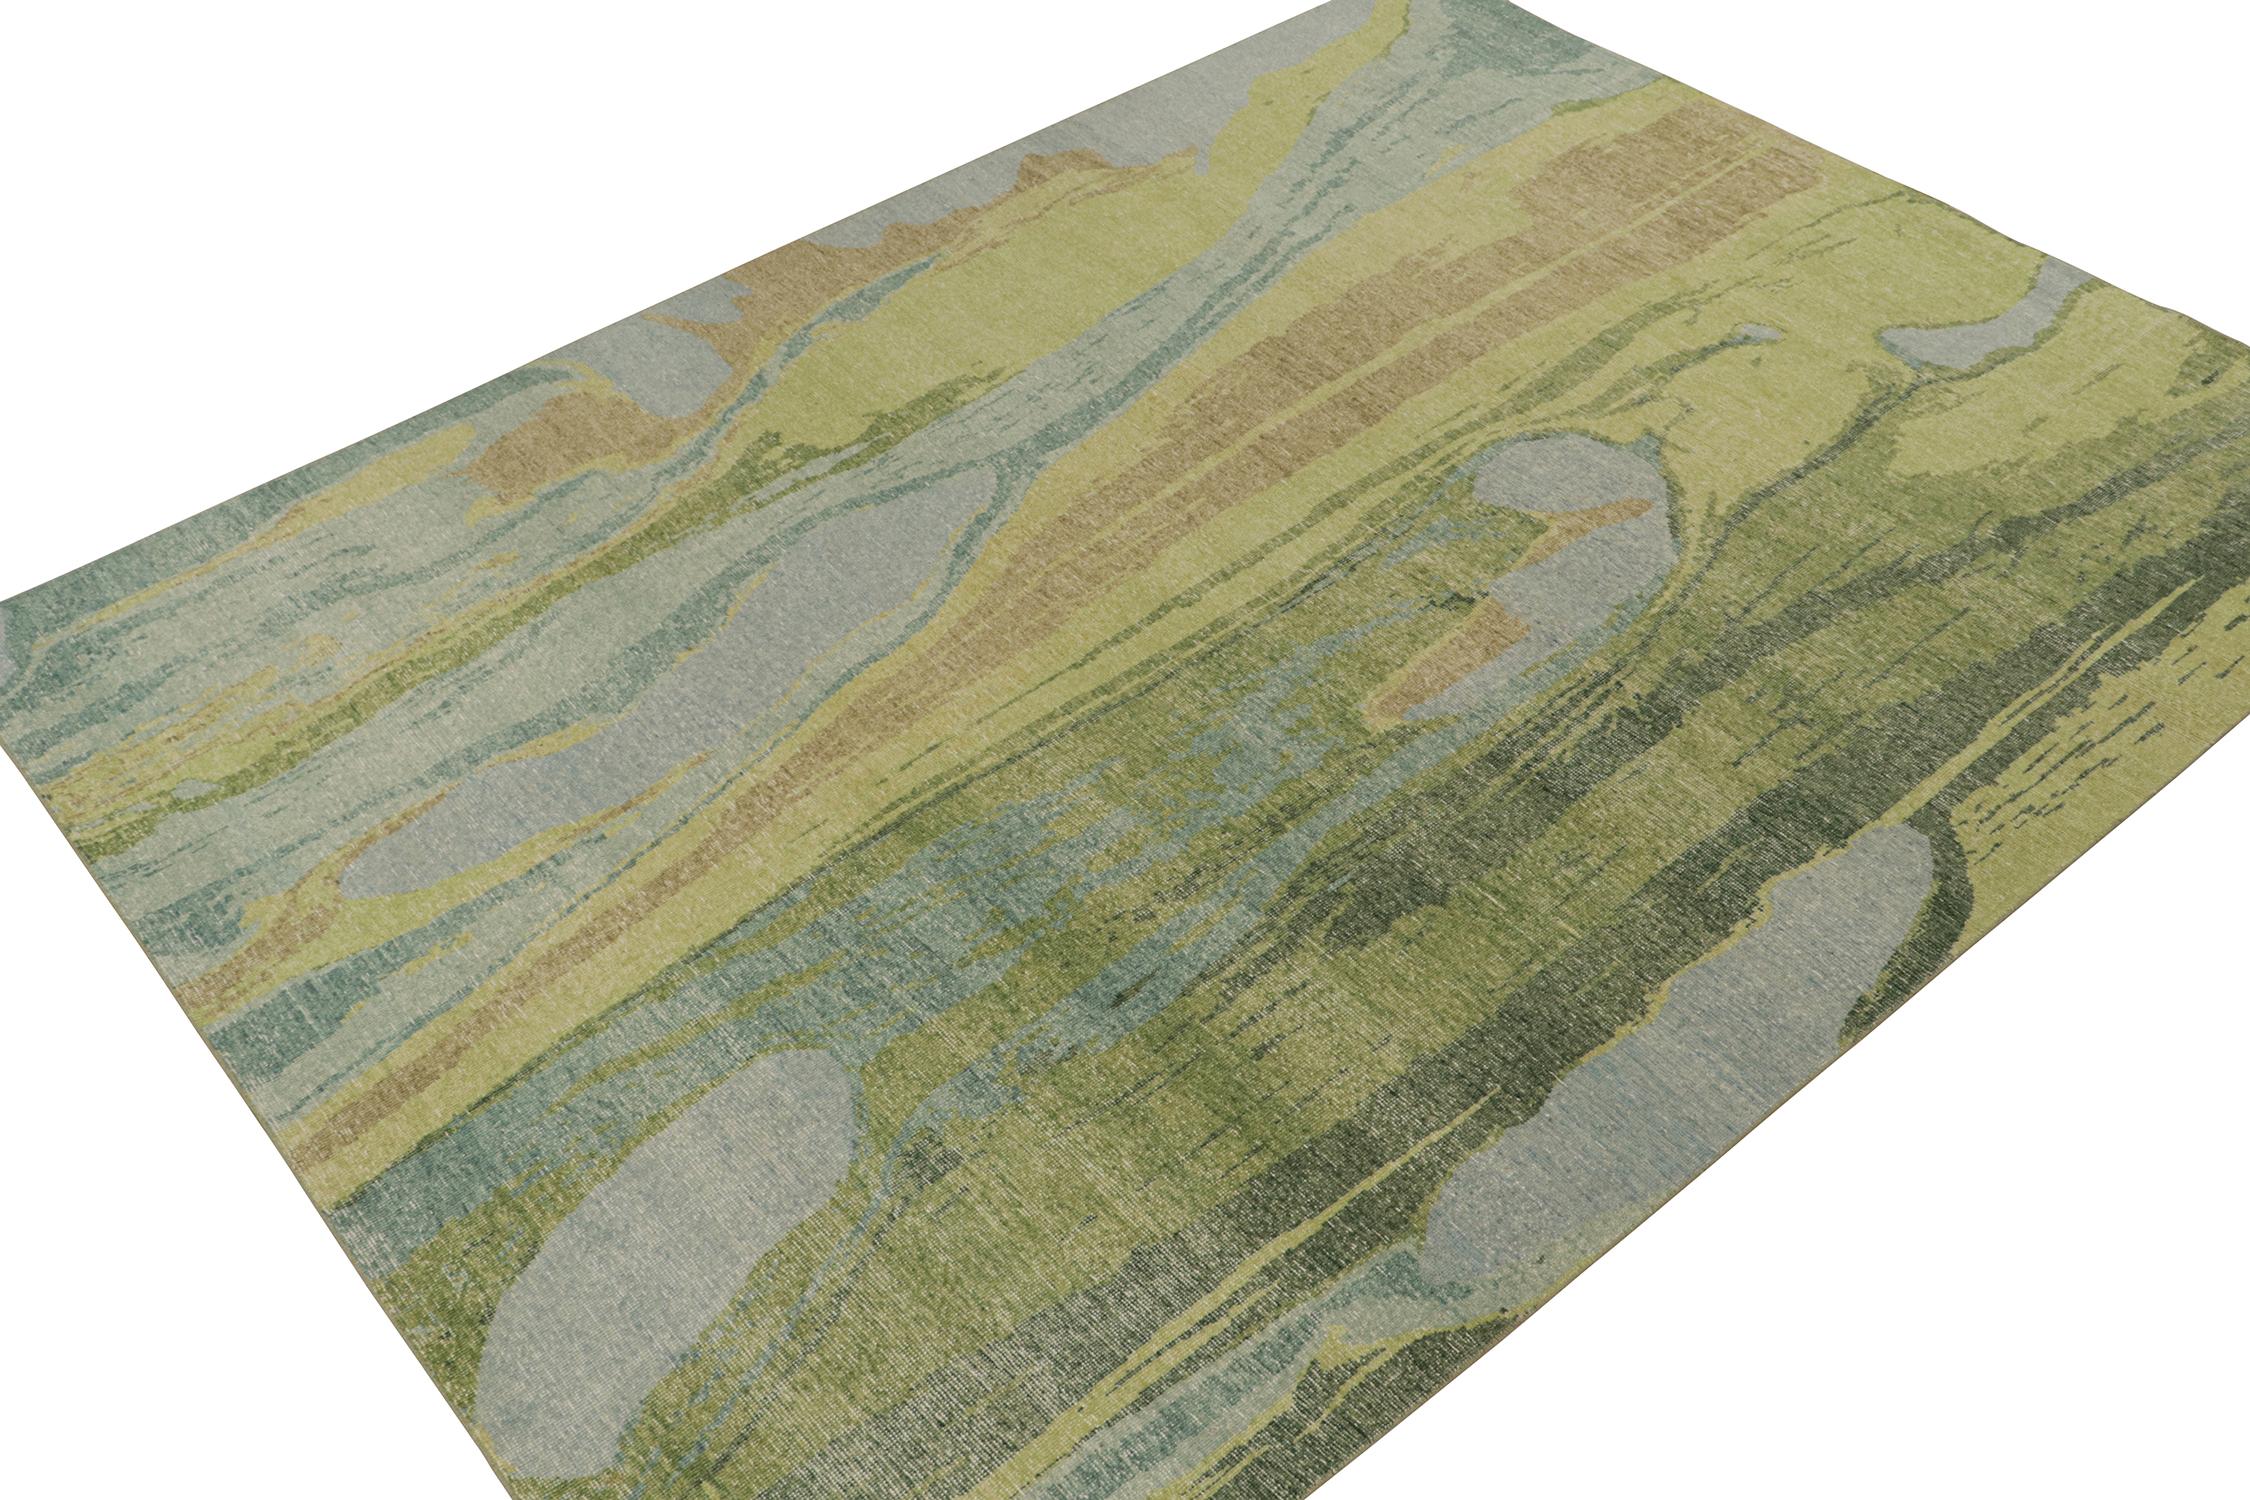 This contemporary 9x12 abstract rug is a new addition to the Homage Collection by Rug & Kilim.

Further on the design:

Hand-knotted in wool and cotton, this design evokes a fluid play blue, green, beige, and gold paint strokes. Keen eyes might see